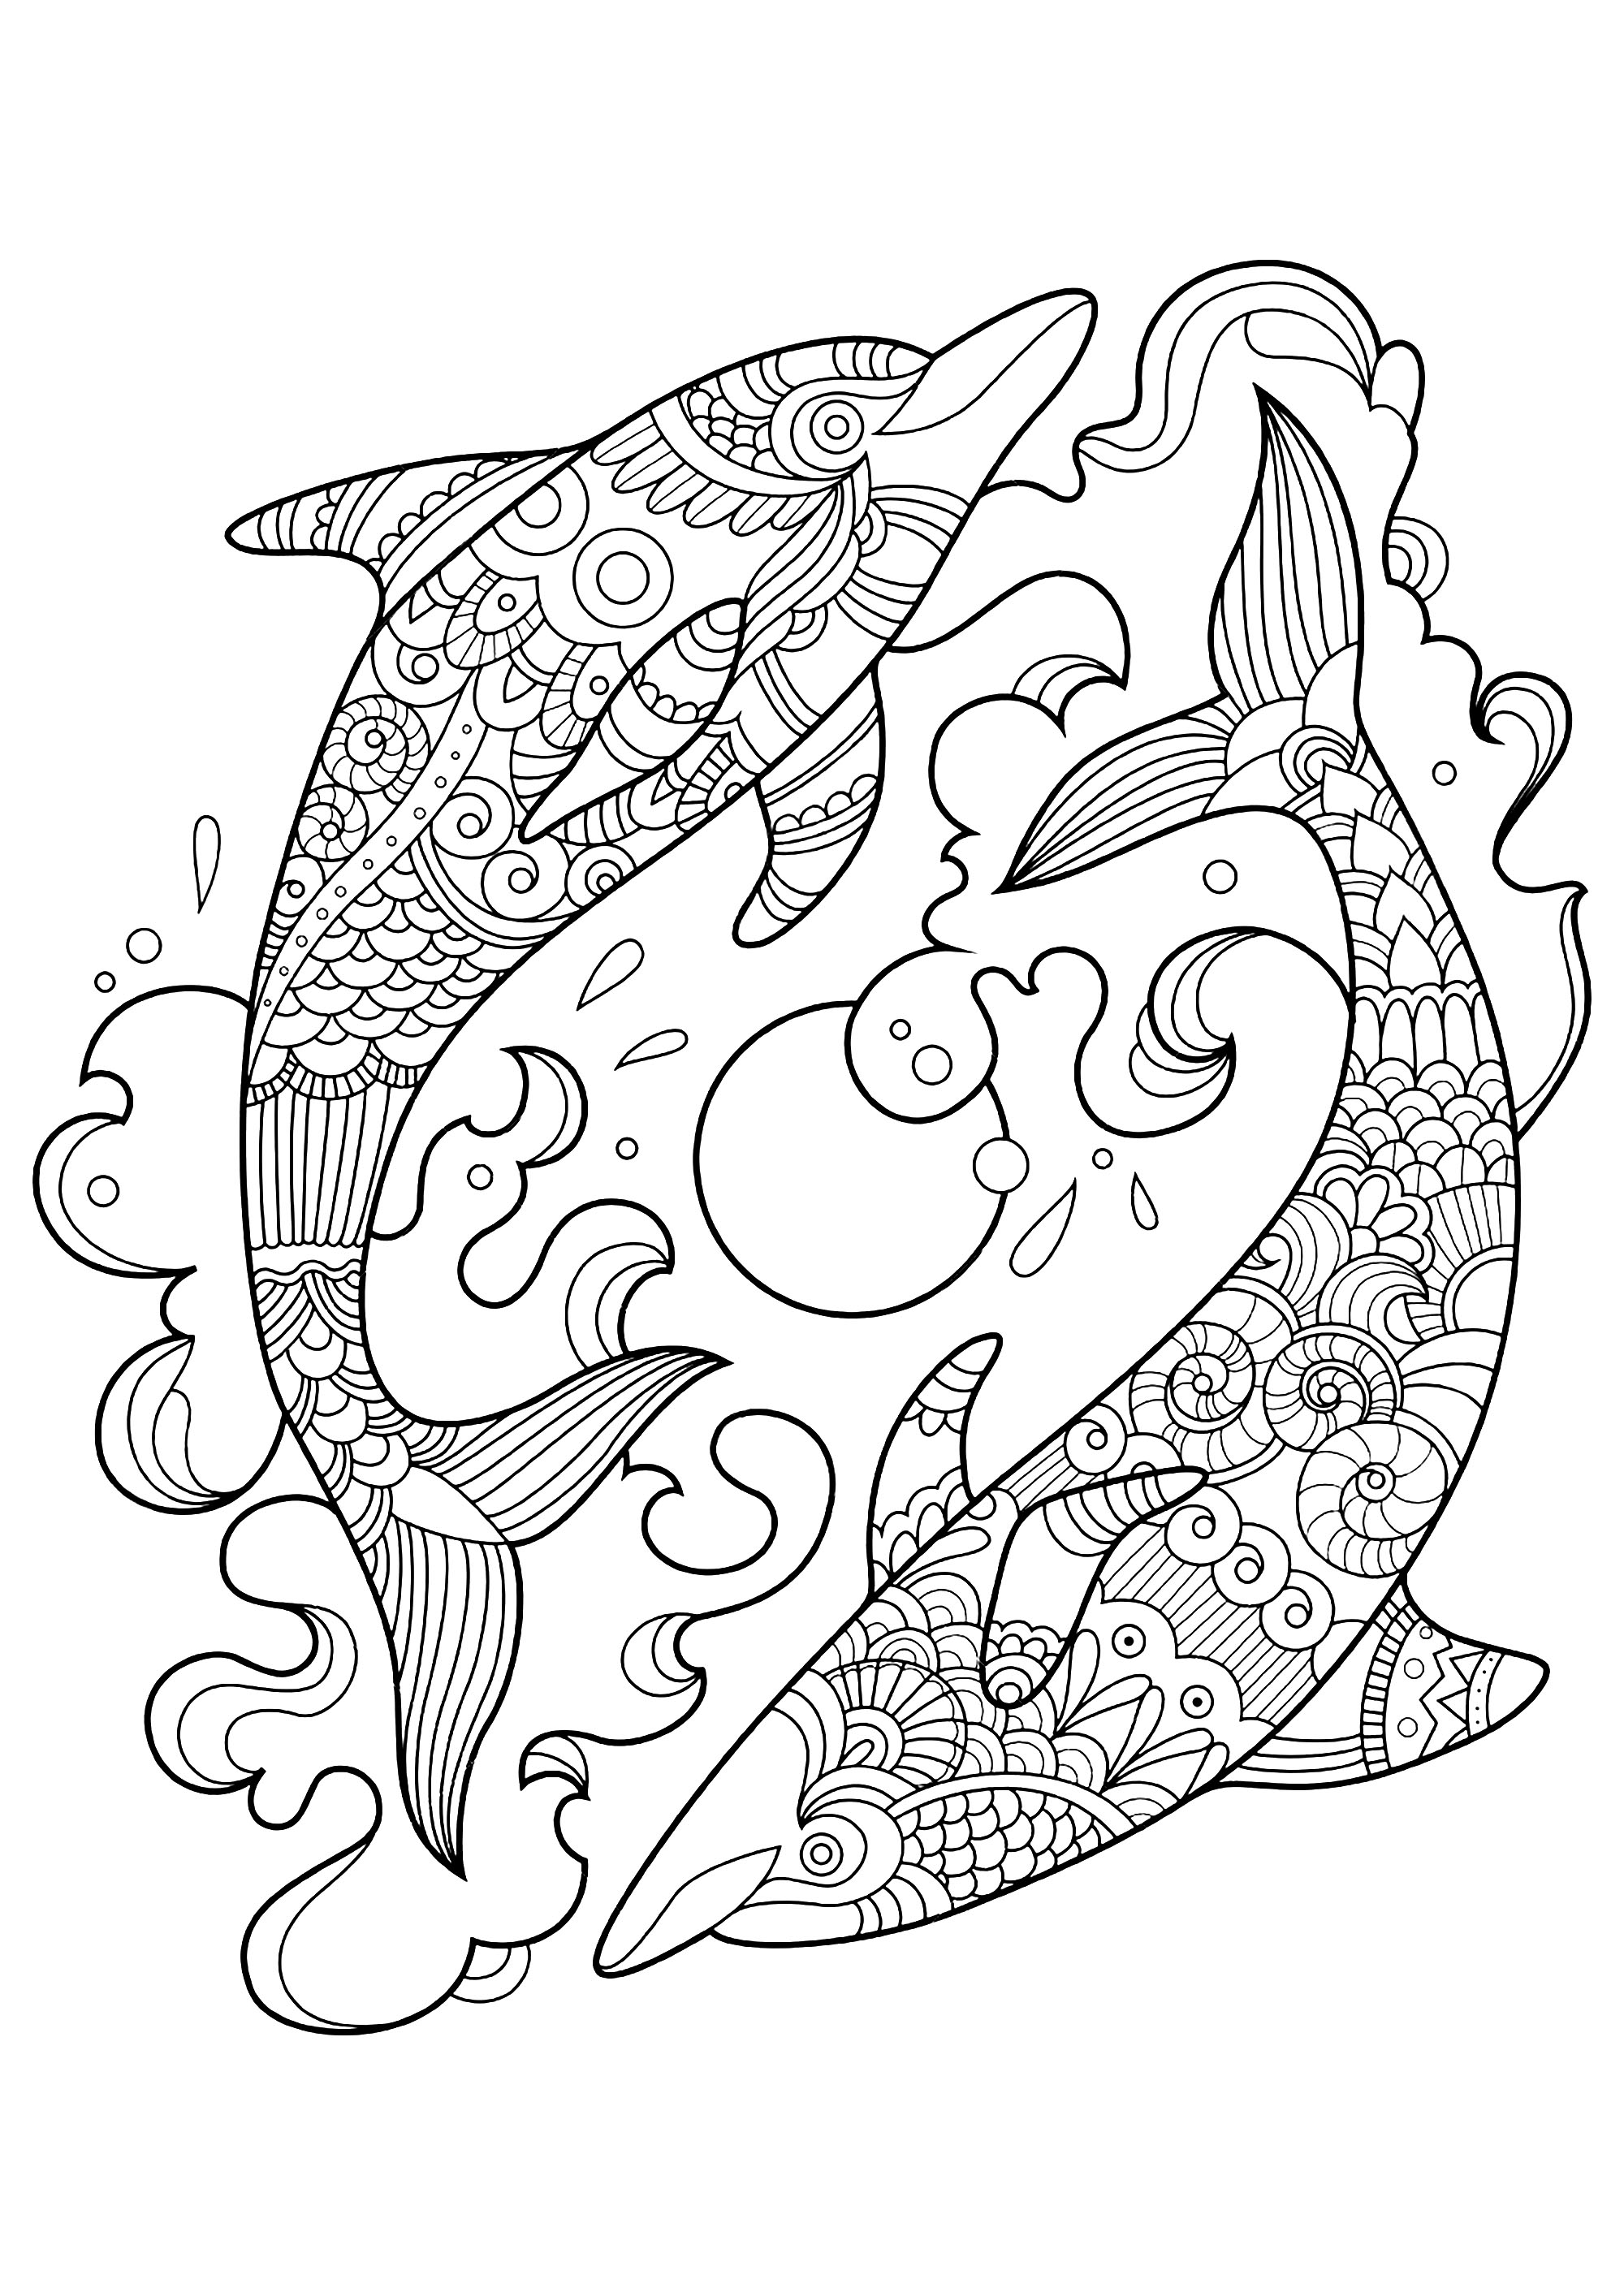 dolphin coloring page miami dolphins coloring sheets bestappsforkidscom page coloring dolphin 